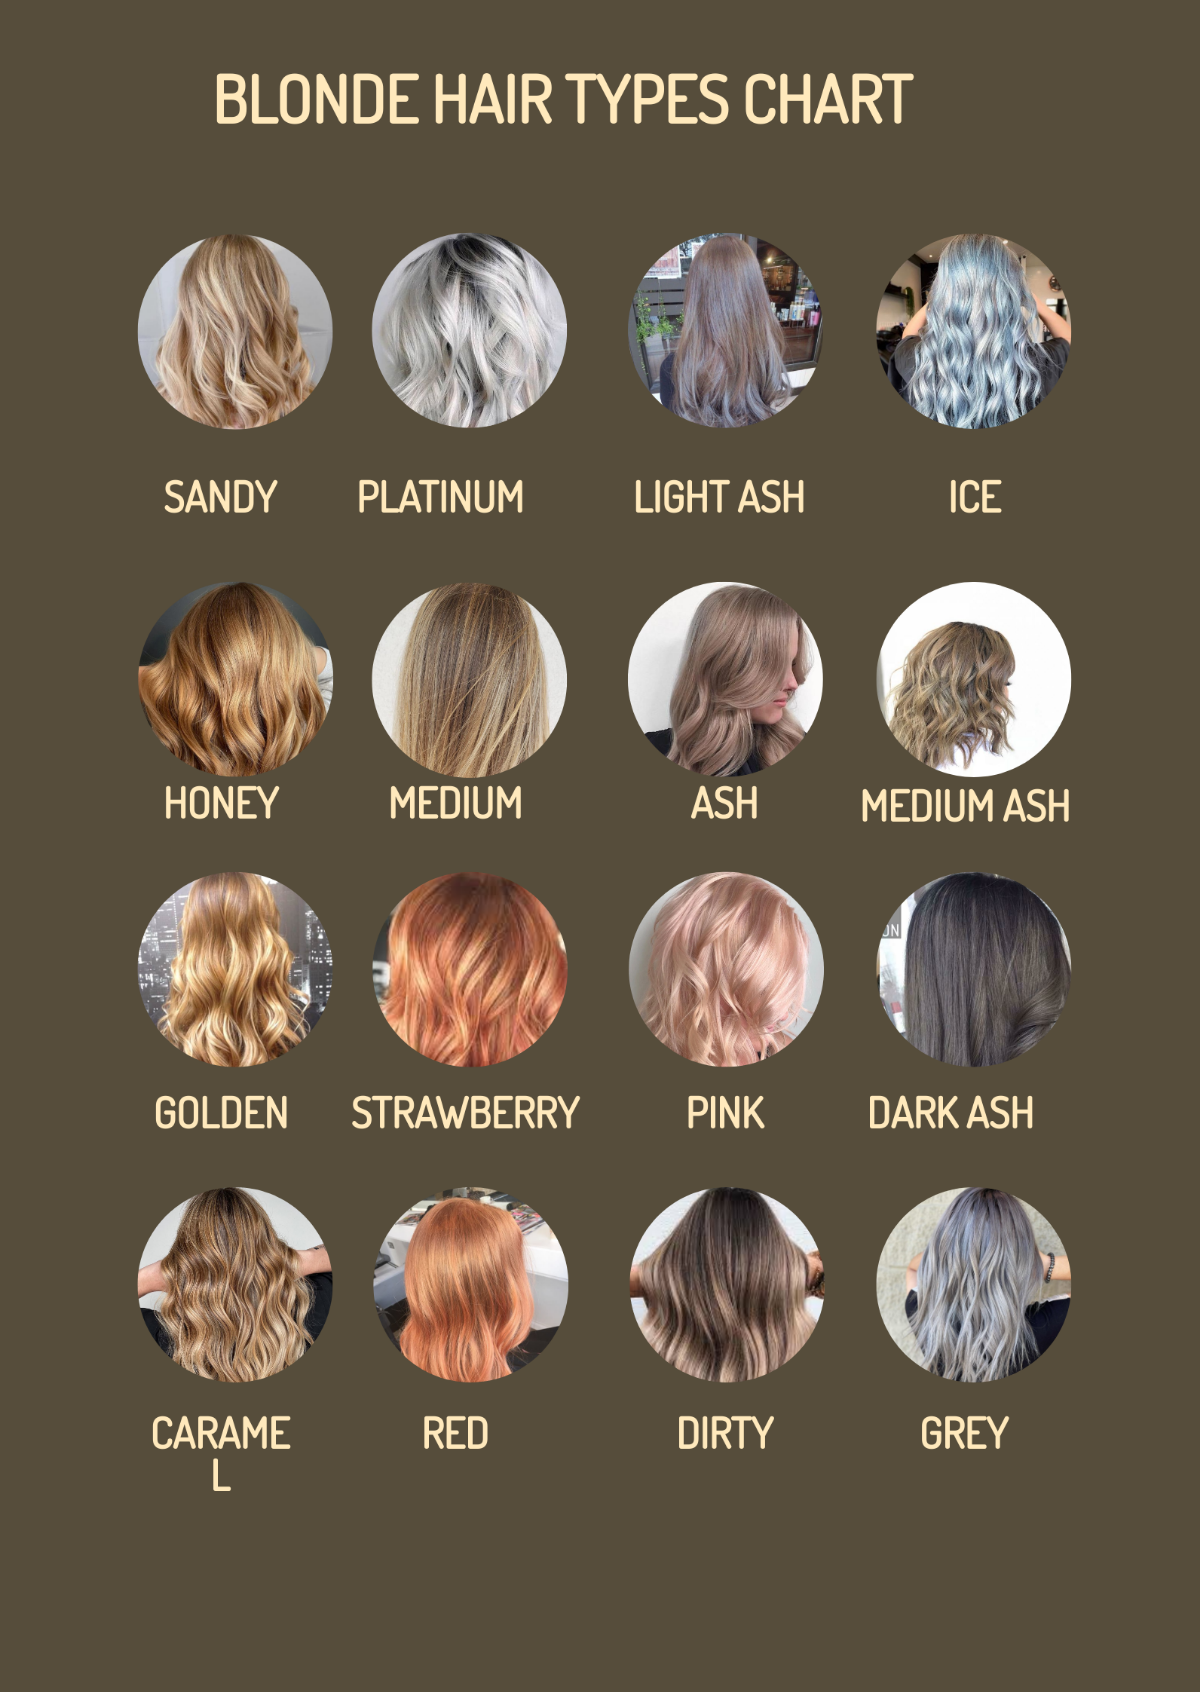 Blonde Hair Types Chart Template